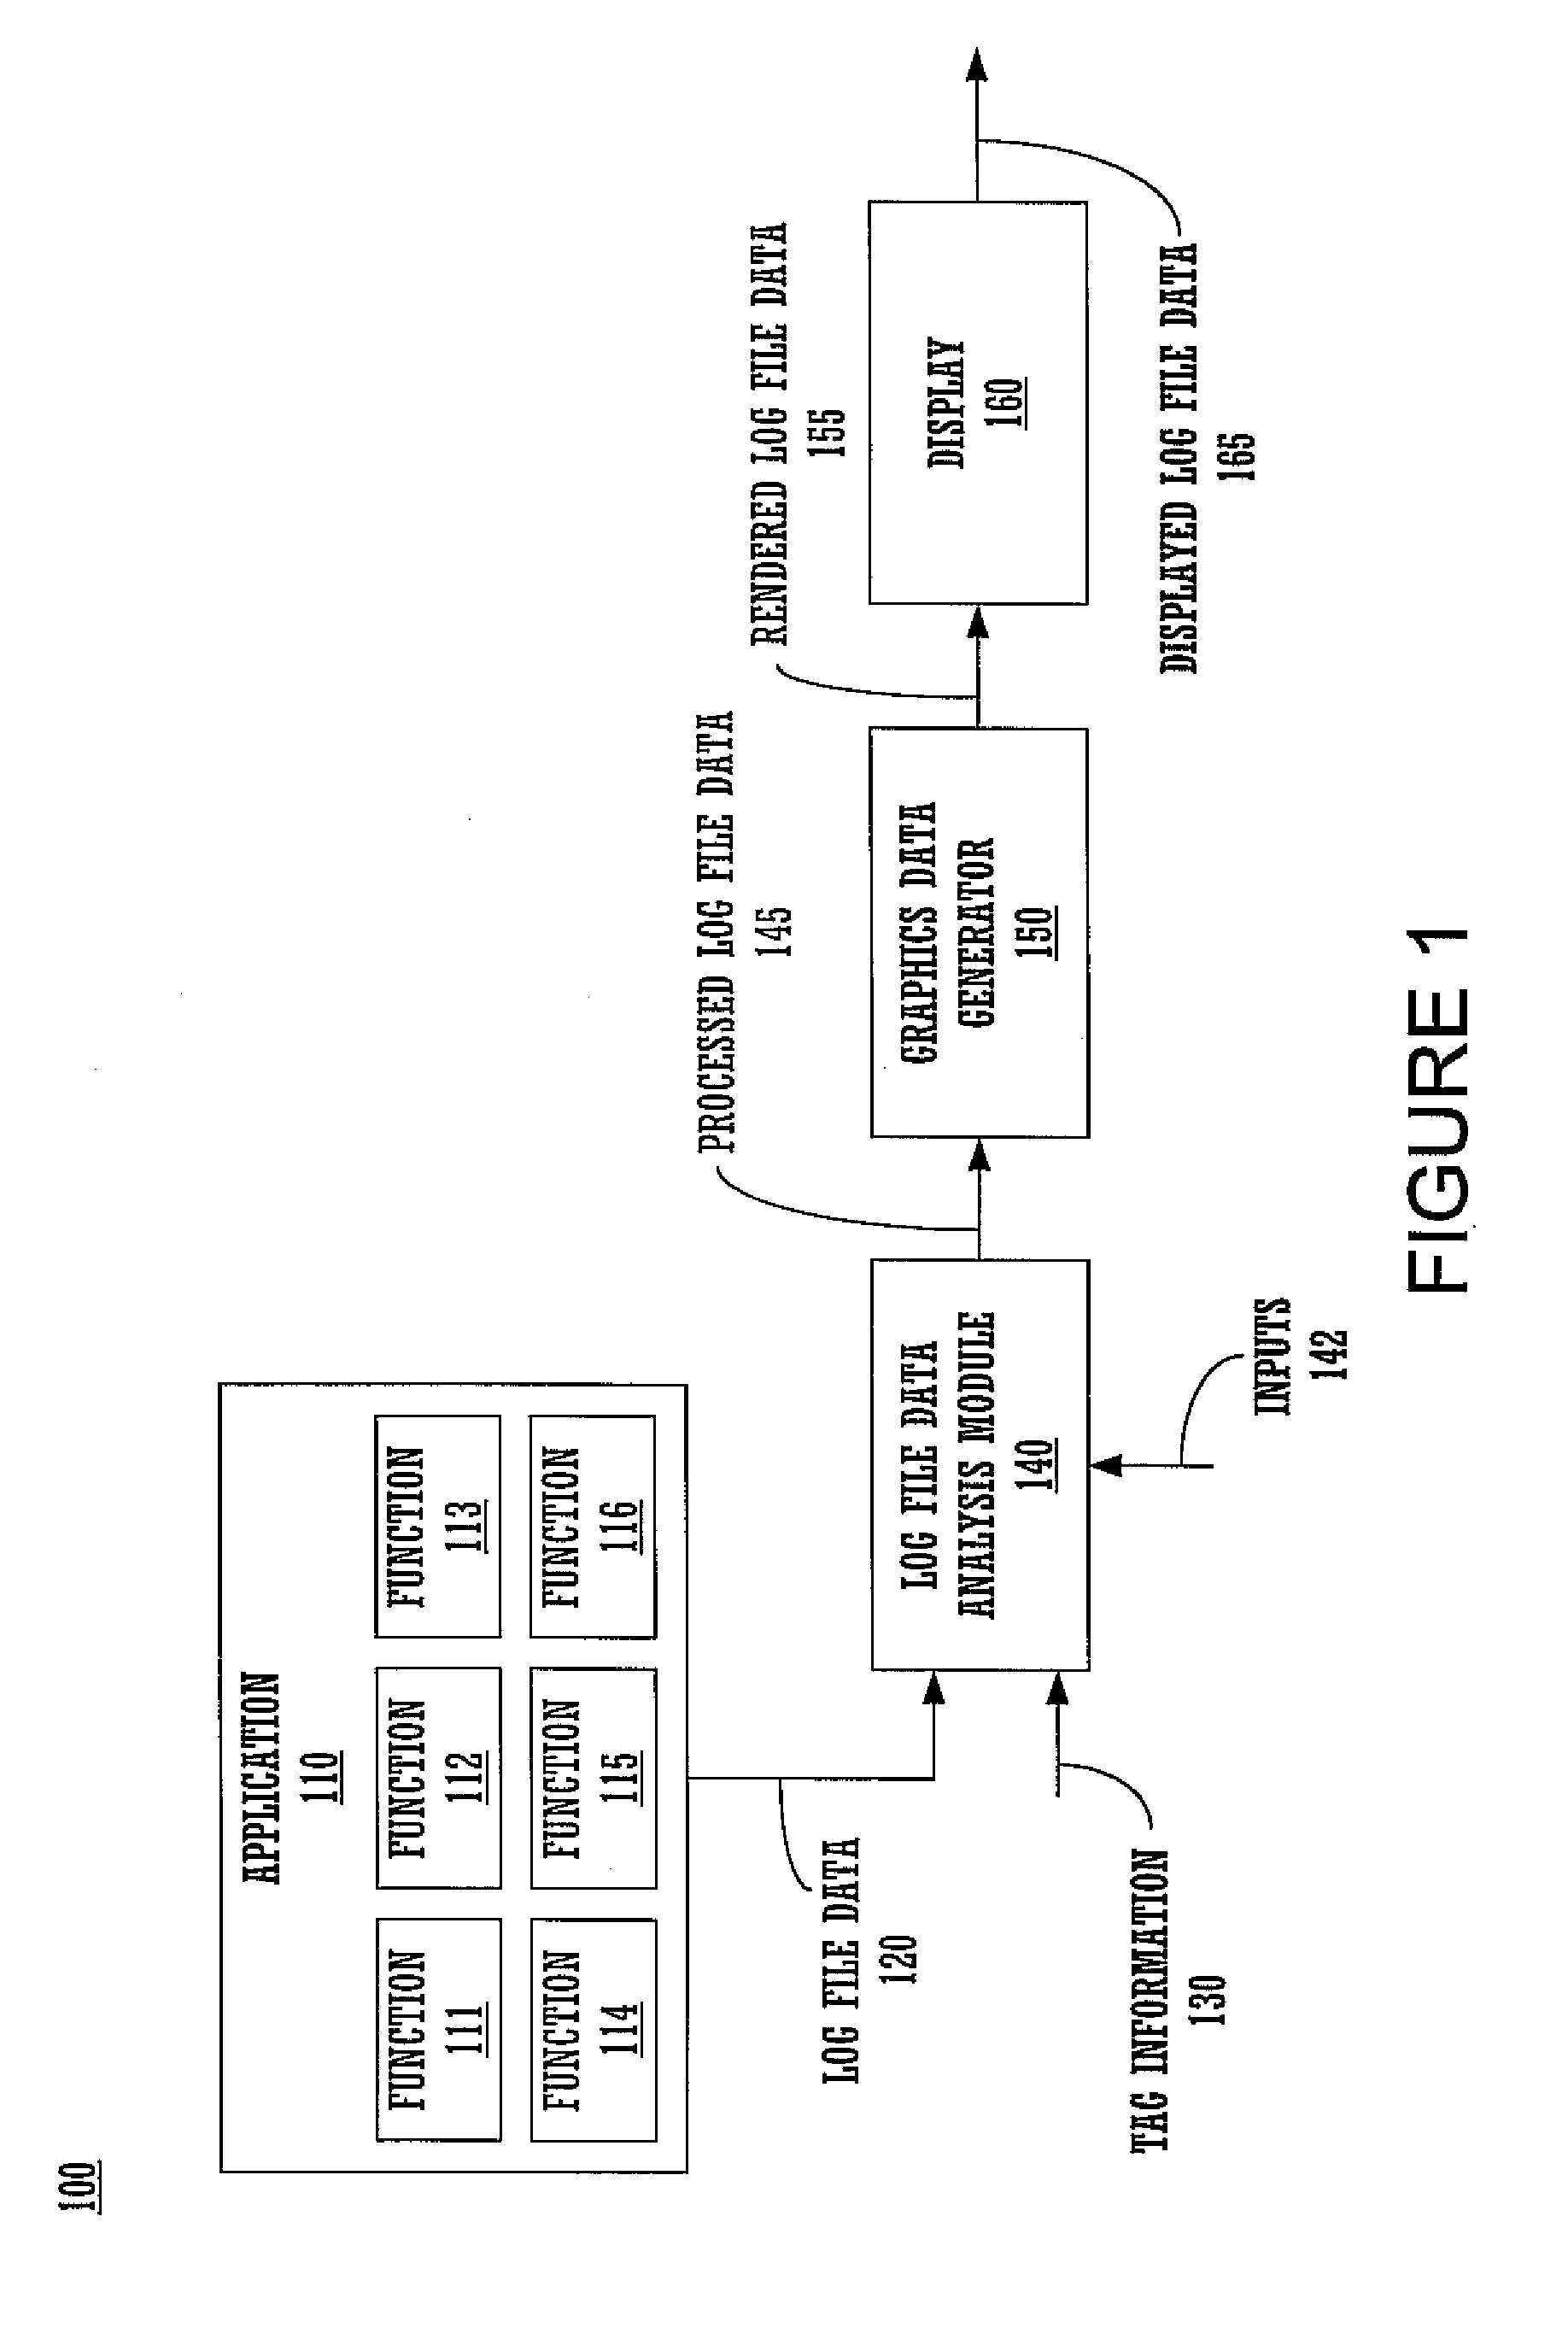 Method and system for log file processing and generating a graphical user interface based thereon